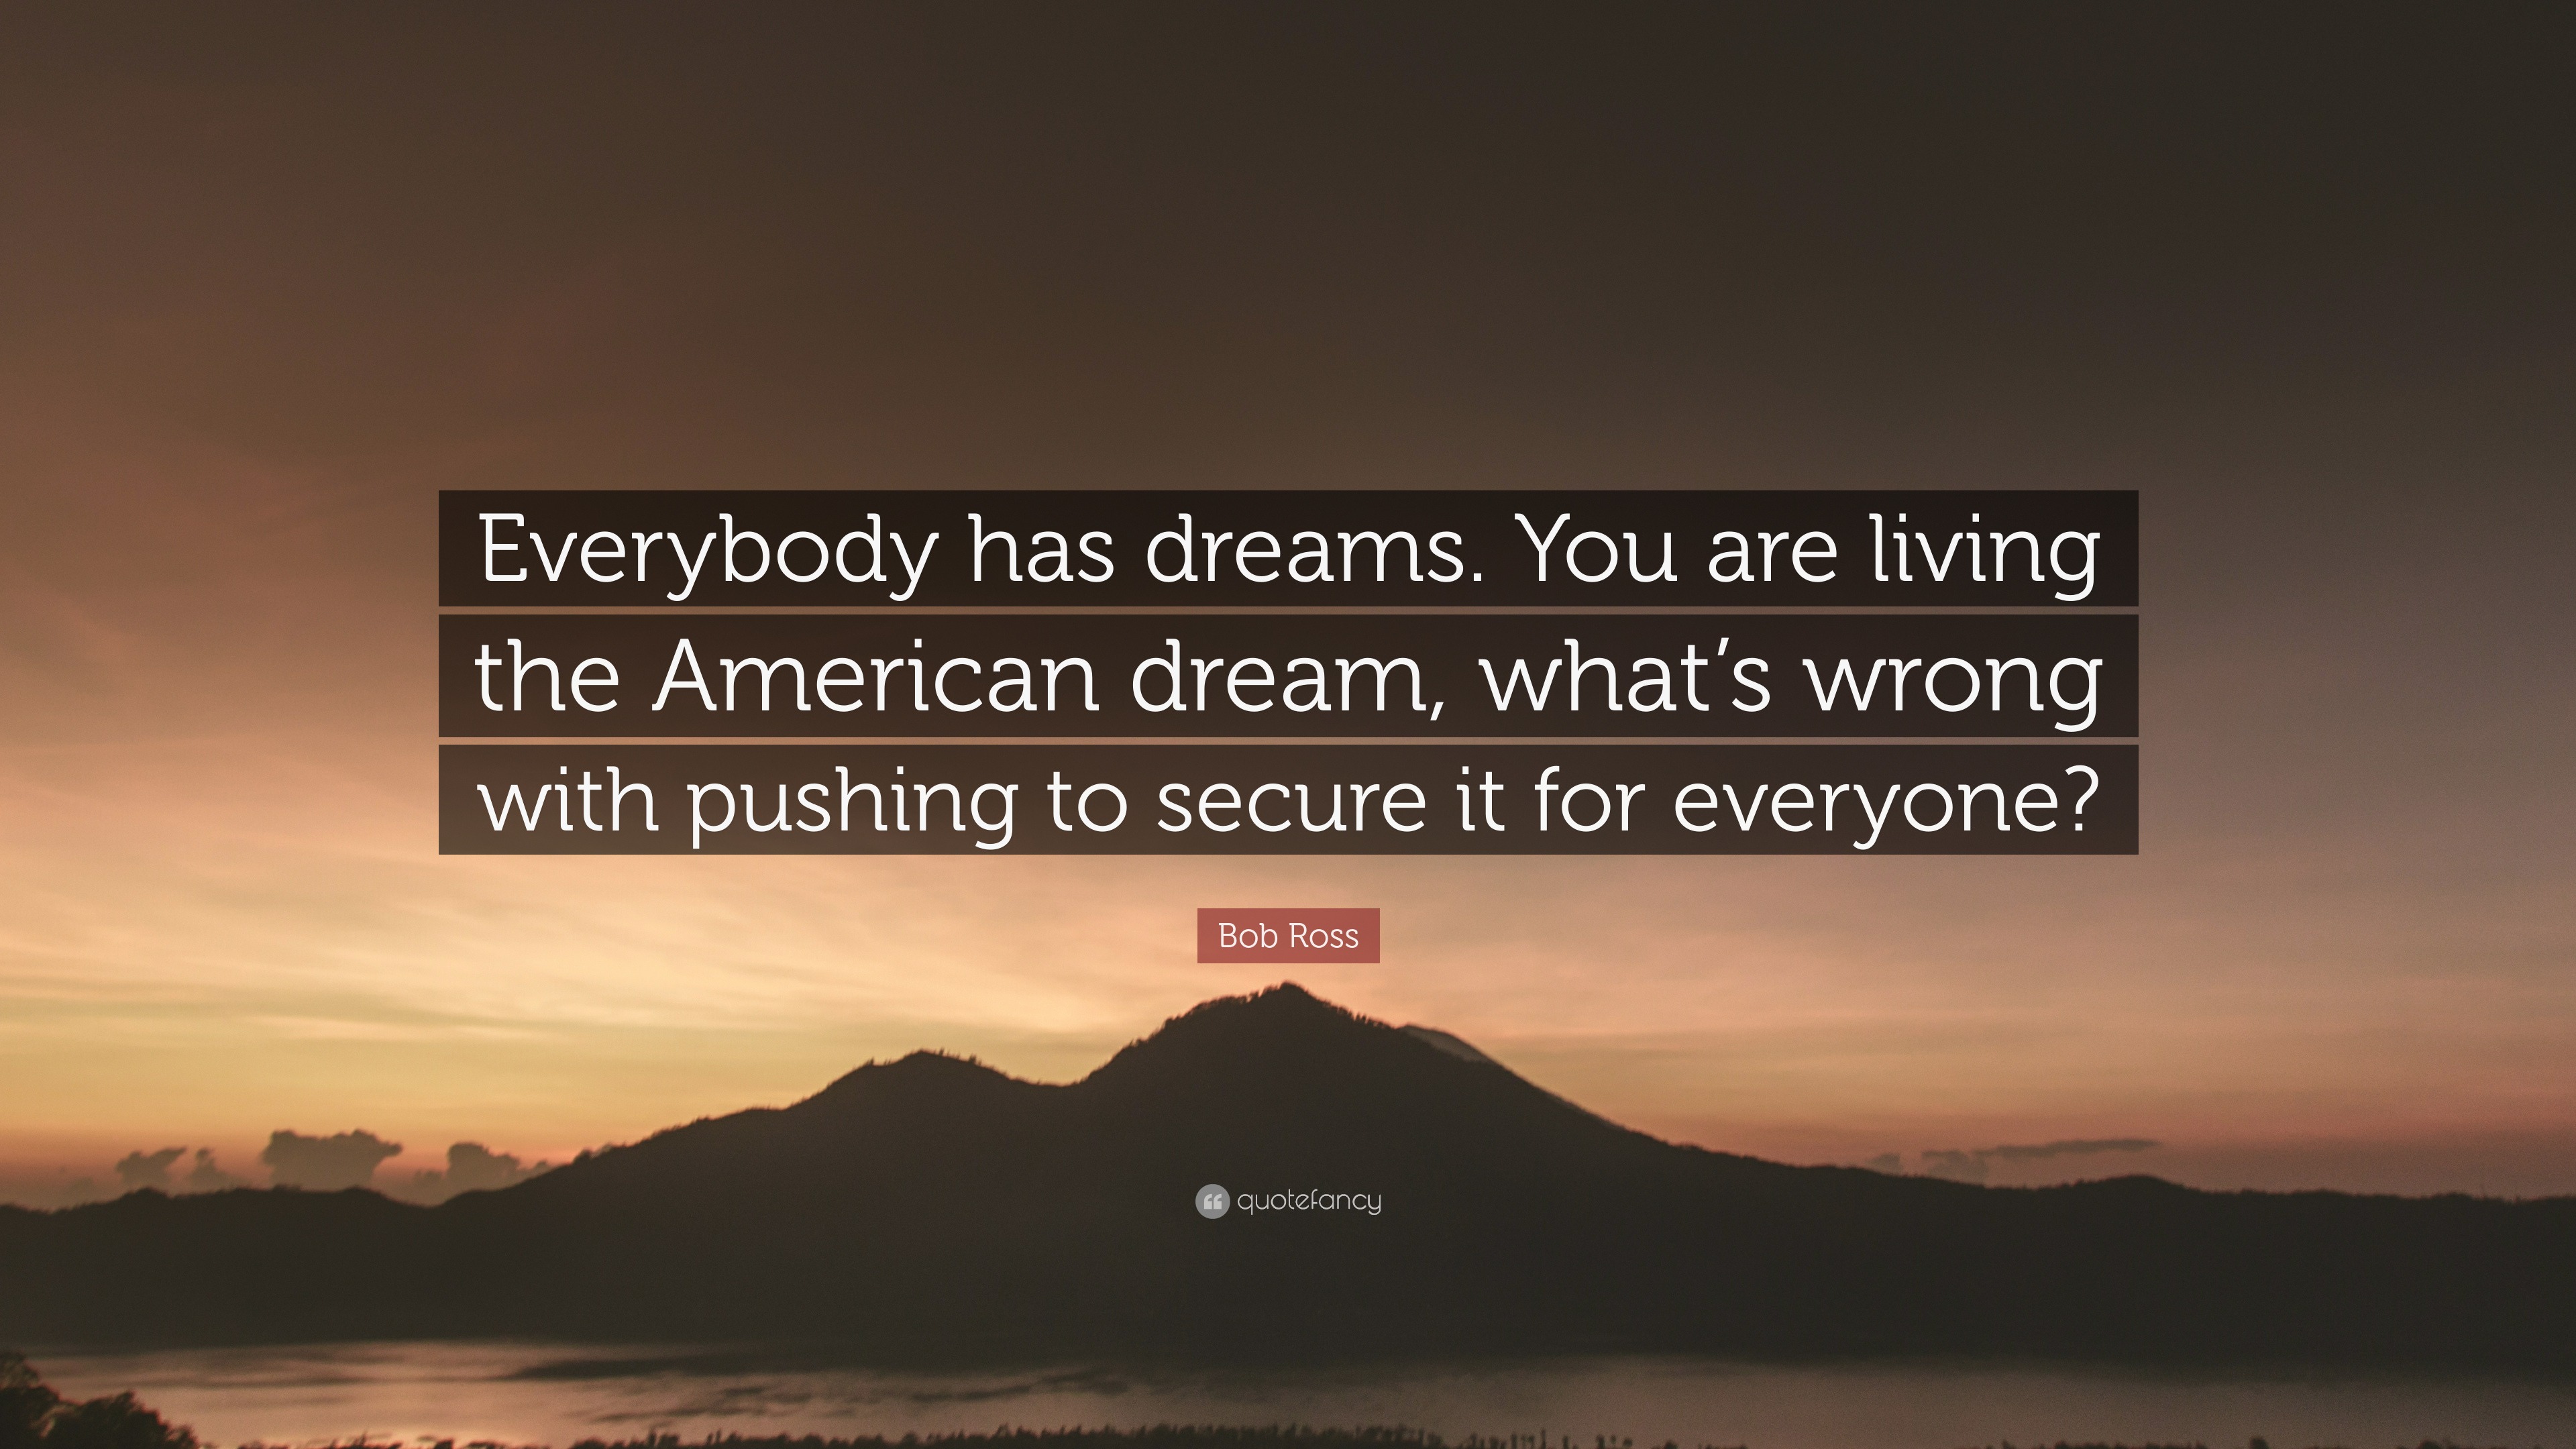 Bob Ross Quote: “Everybody has dreams. You are living the American ...